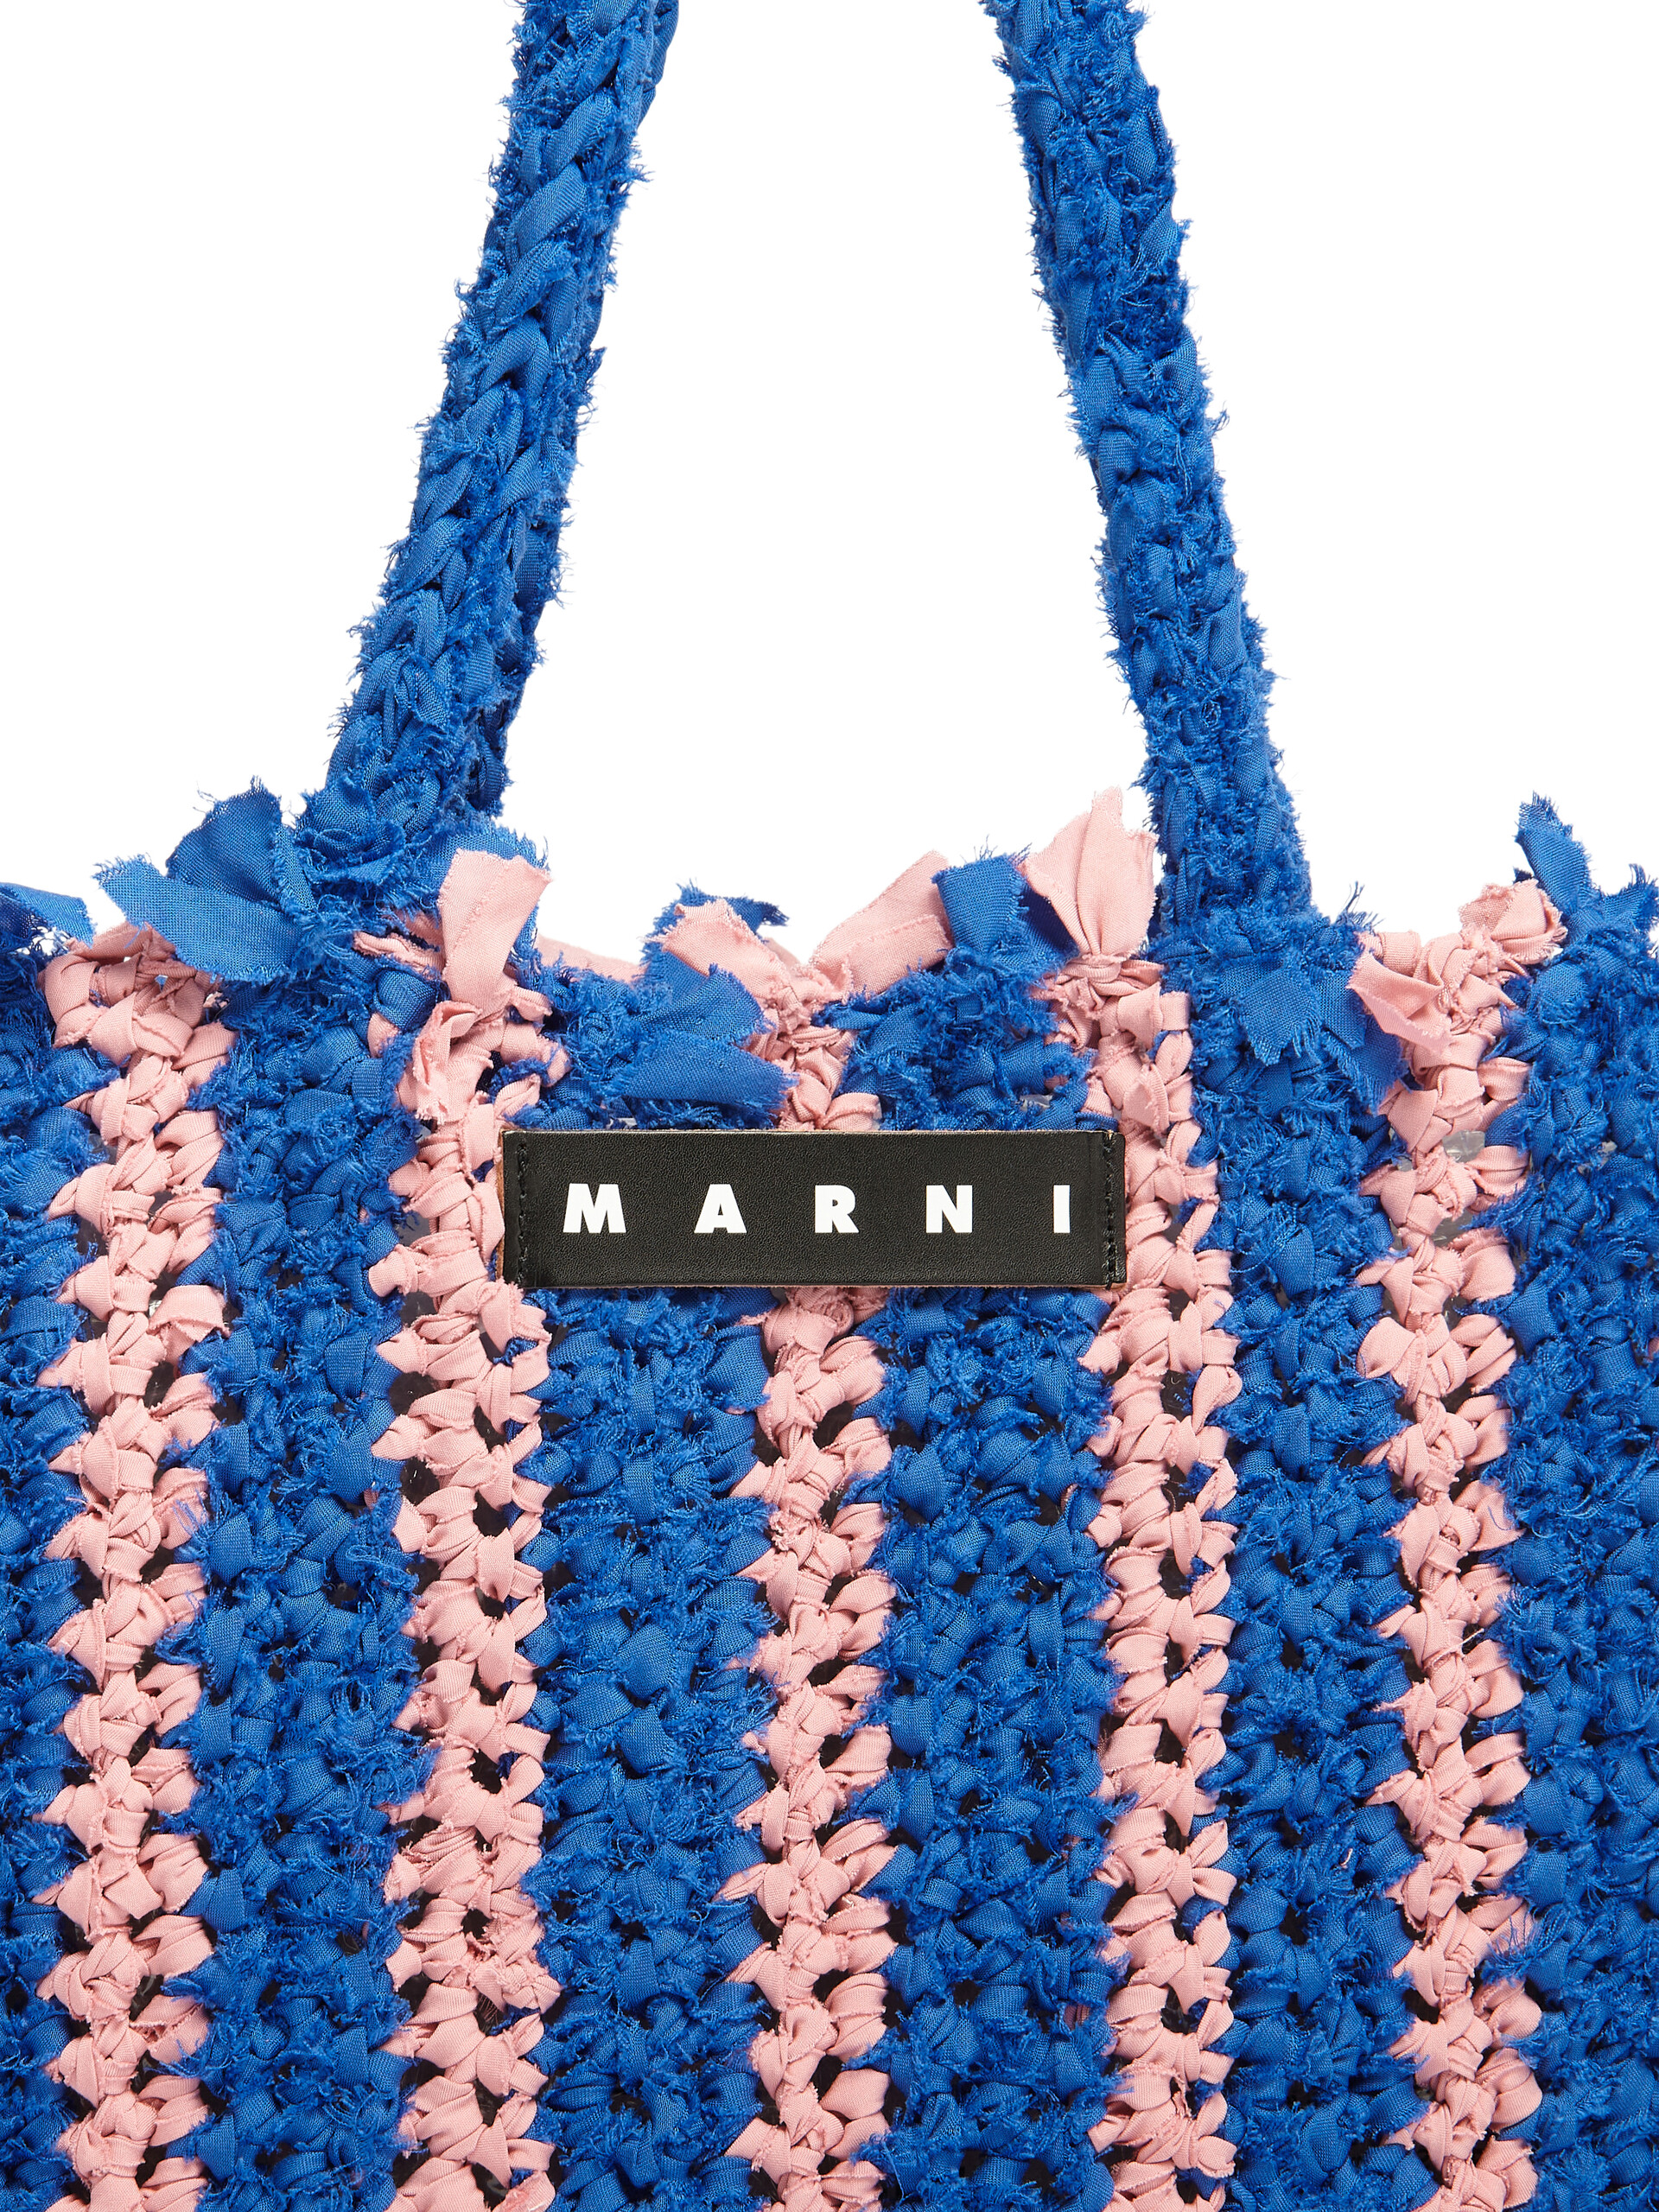 MARNI MARKET bag in pink and blue cotton - Bags - Image 4